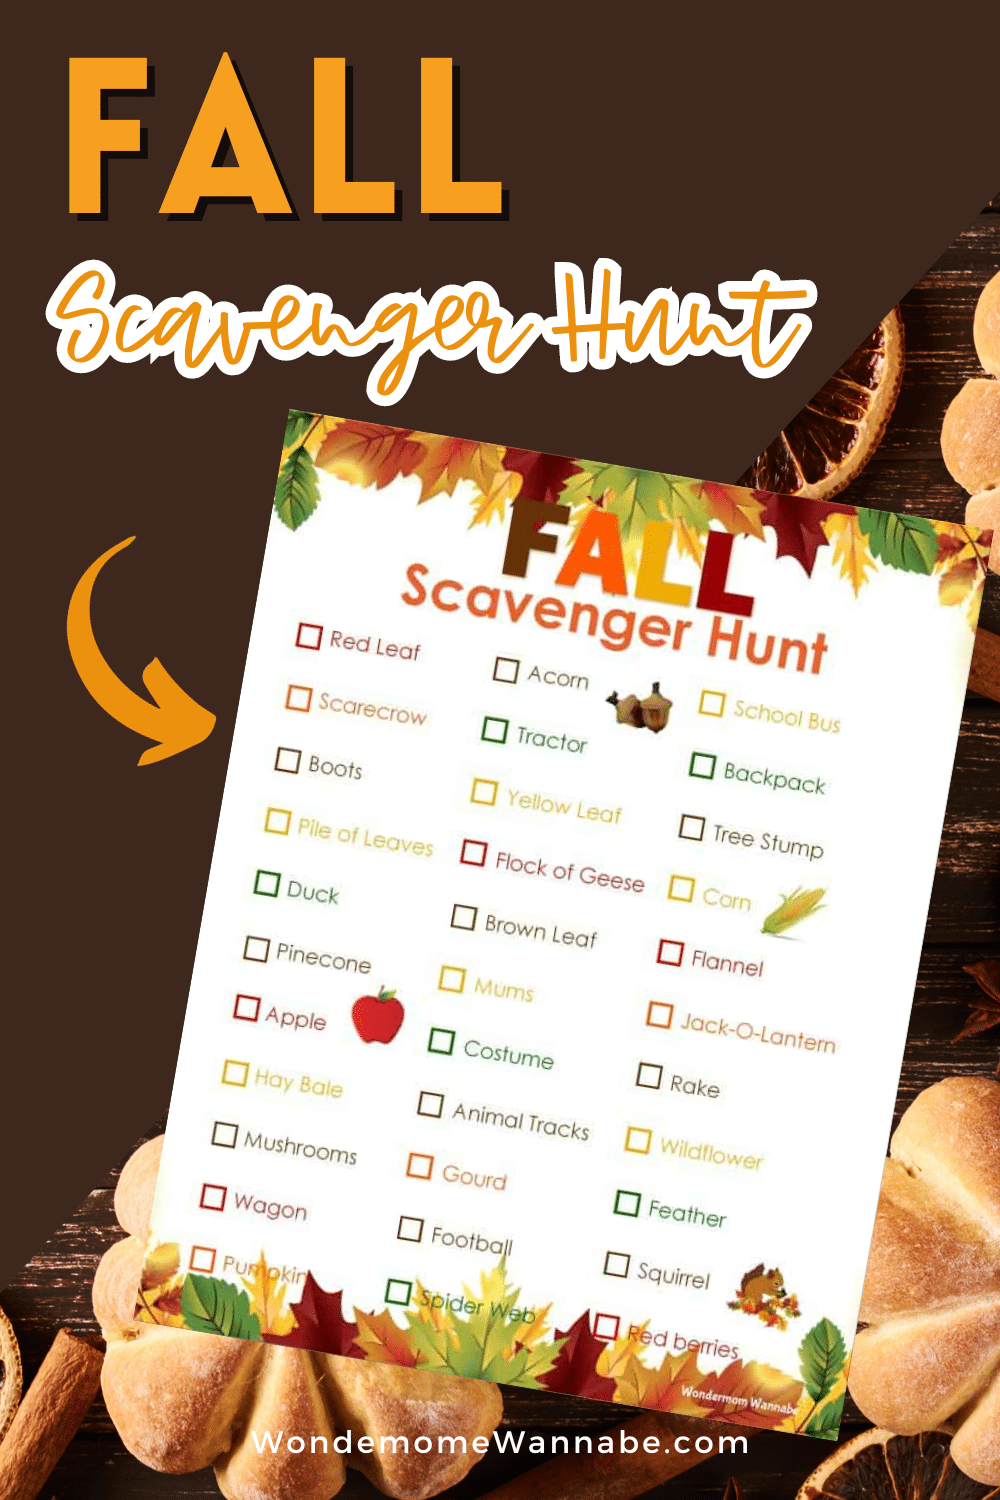 Fall scavenger hunt printable. Enjoy the autumn season with a fun and interactive fall scavenger hunt. This printable activity is perfect for all ages and can be done outdoors or indoors. Get ready to explore